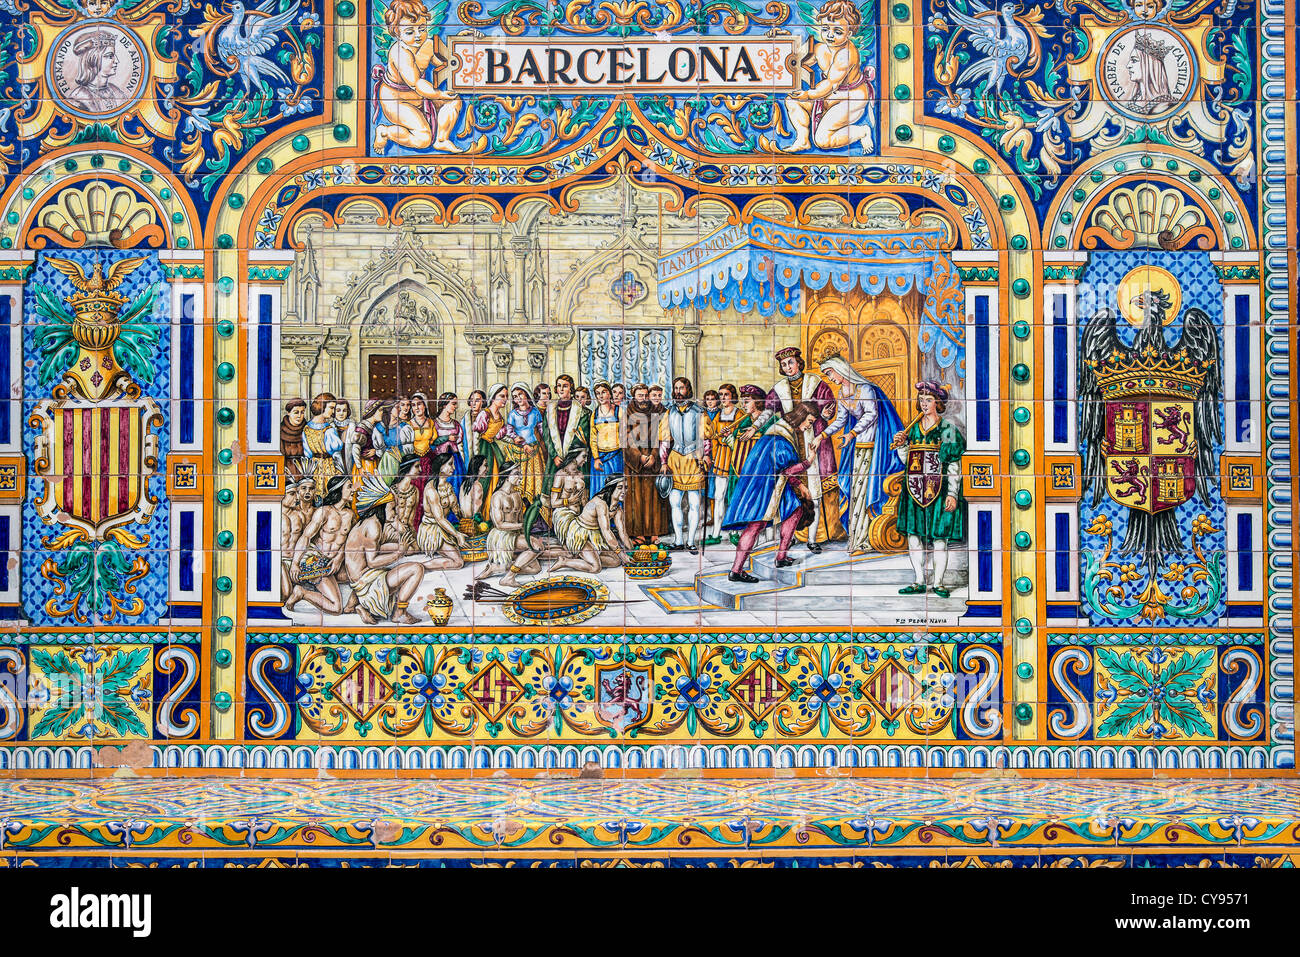 Tiled province alcove of Barcelona along the walls of the Plaza de España, Seville, Andalusia, Spain Stock Photo